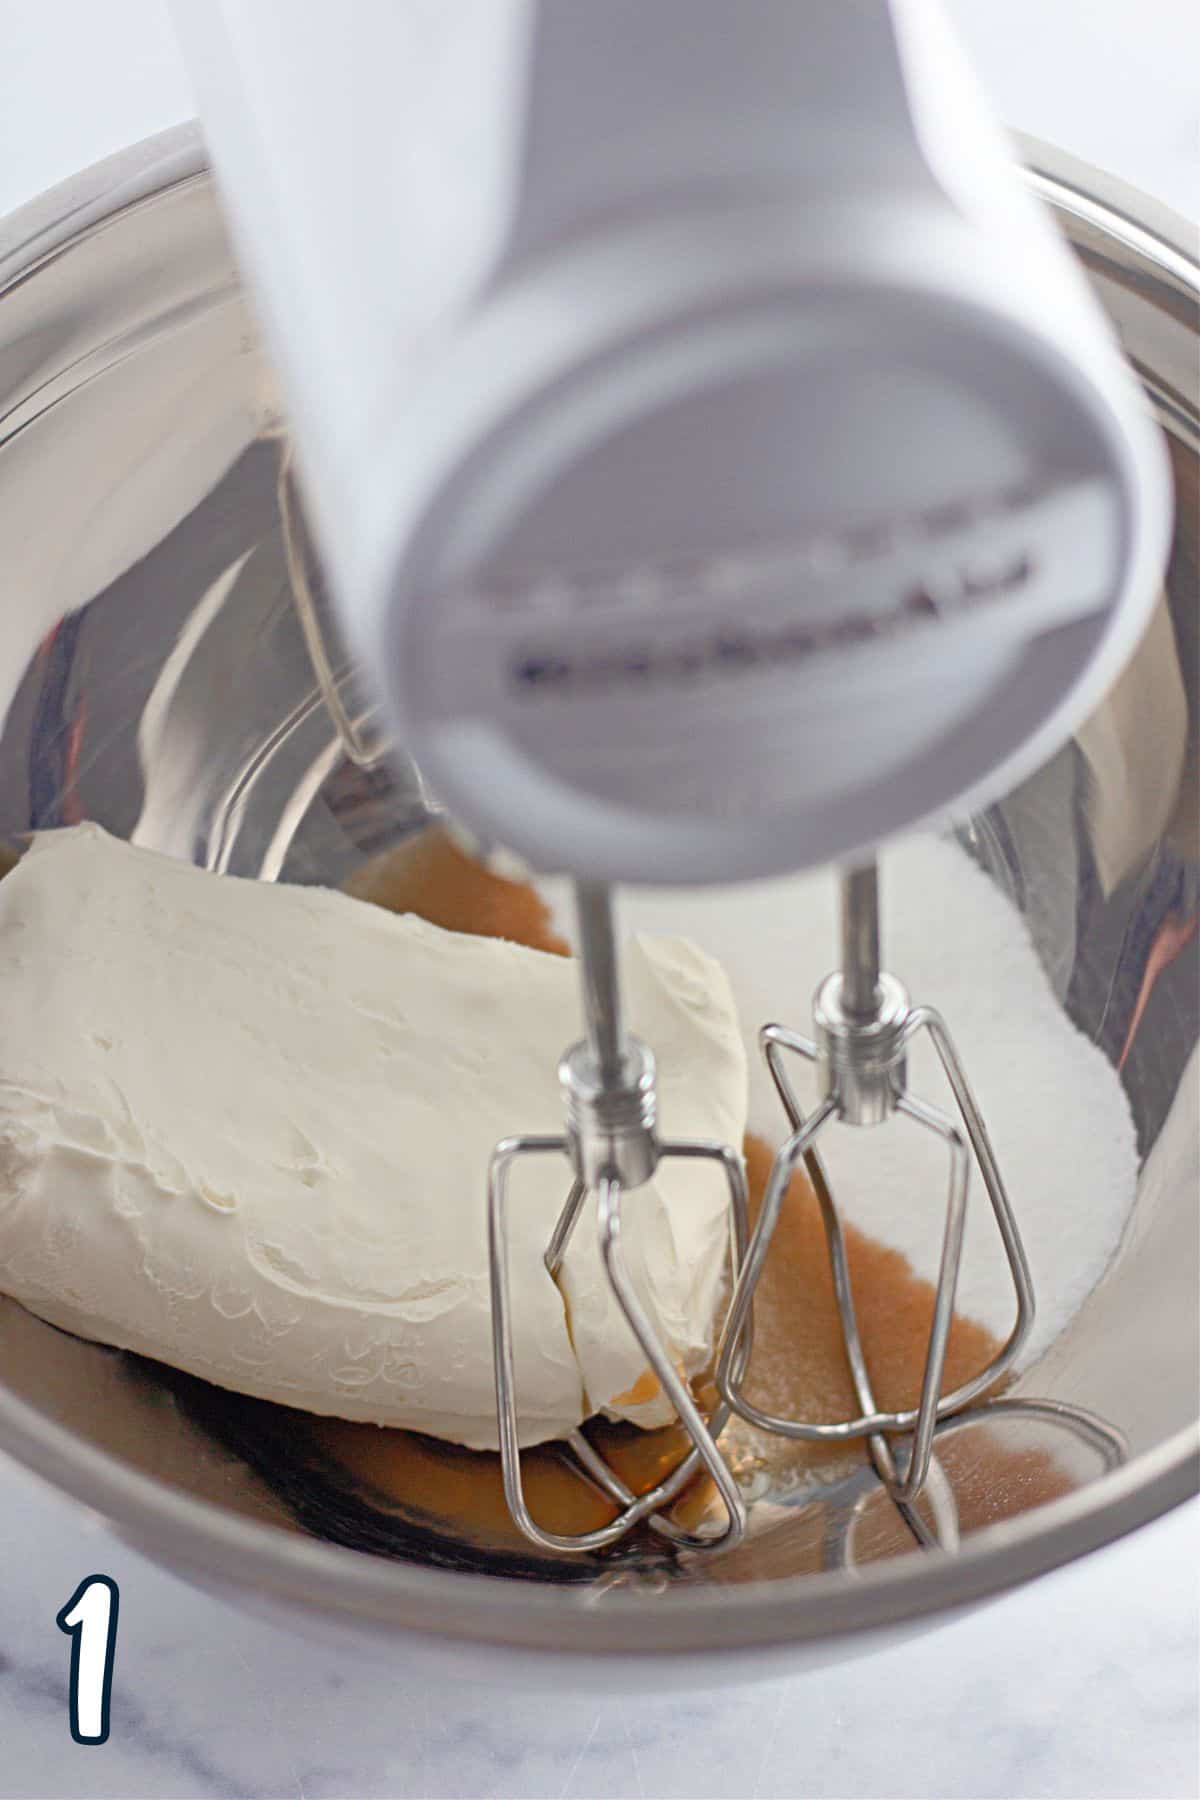 Cream cheese, sugar and vanilla in a mixing bowl with a stand mixer. 